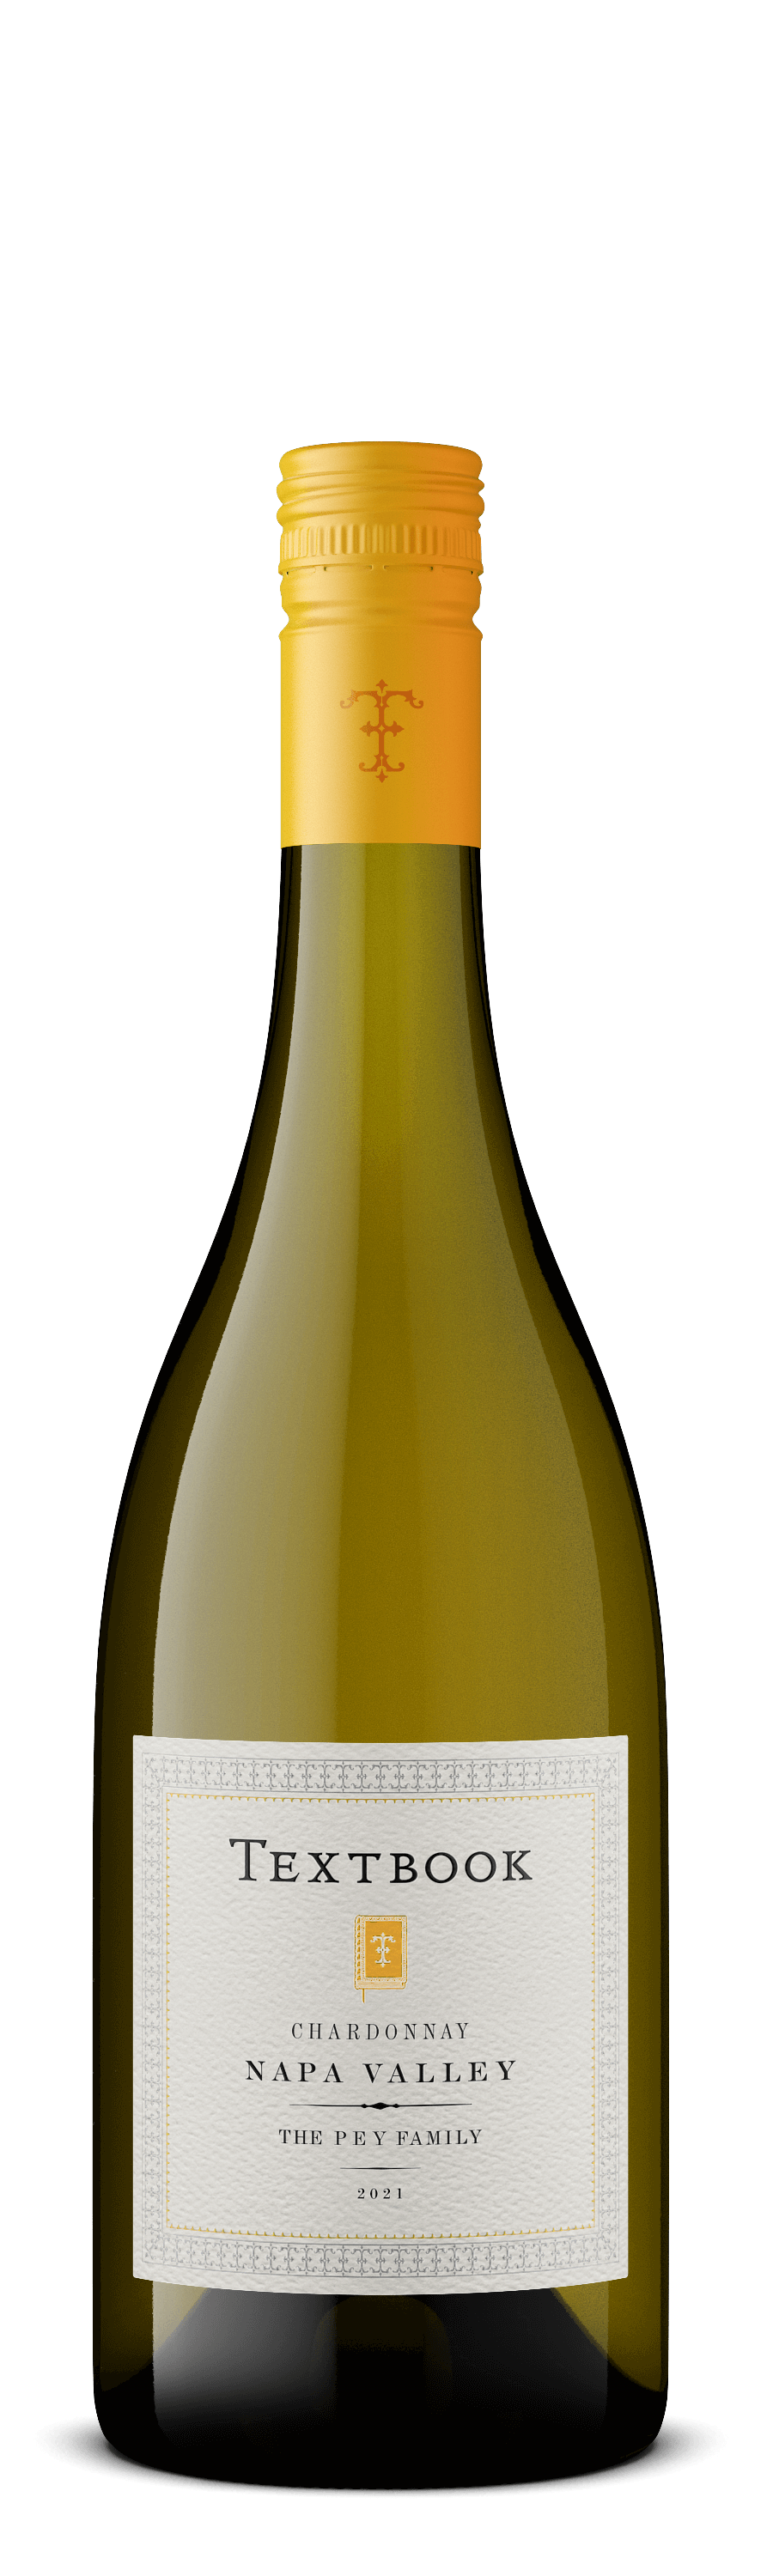 Textbook NapaValley Chard 2021 png